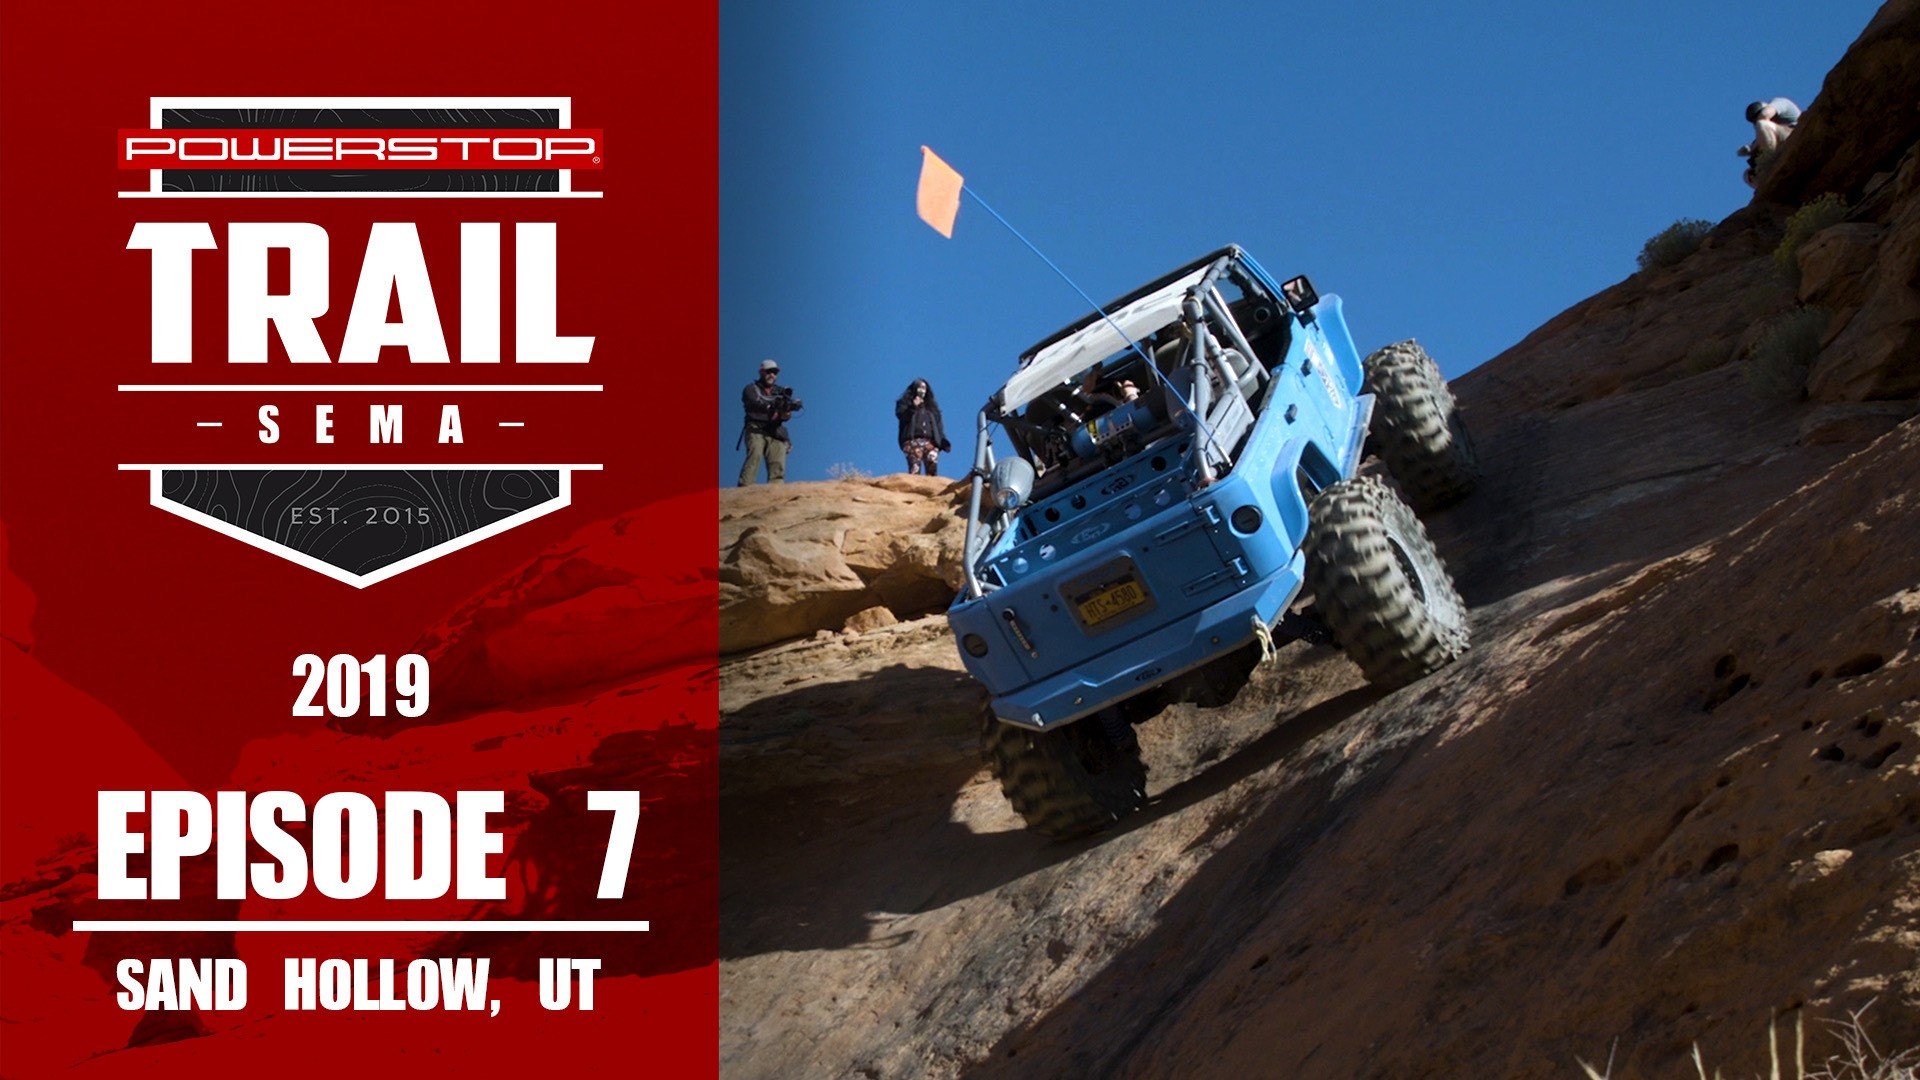 Trail To SEMA Episode 7 sand hollow the maze